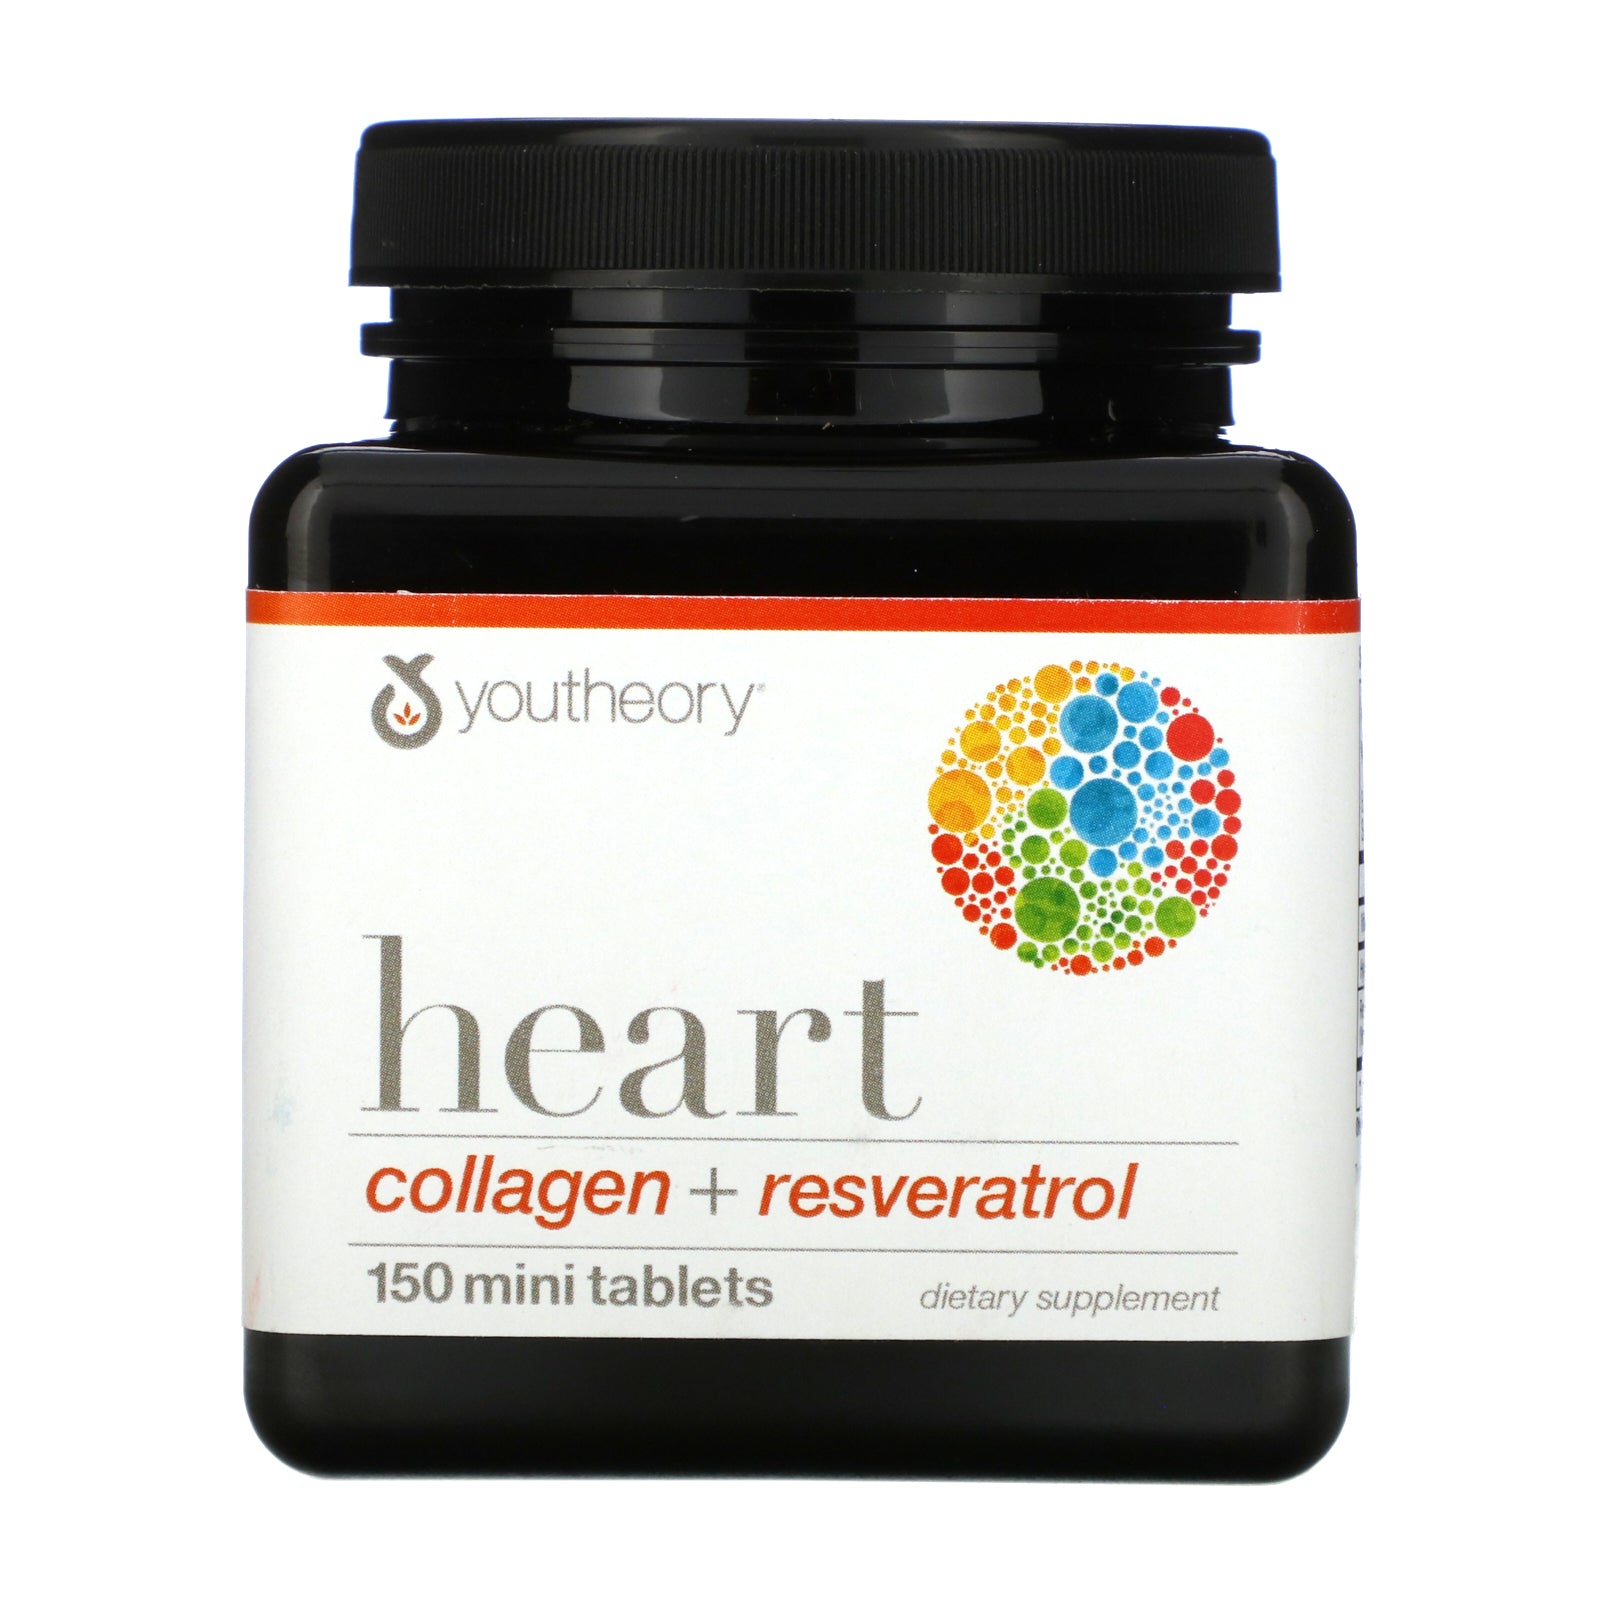 Youtheory, Heart, Collagen + Resveratrol, Mini Tablets